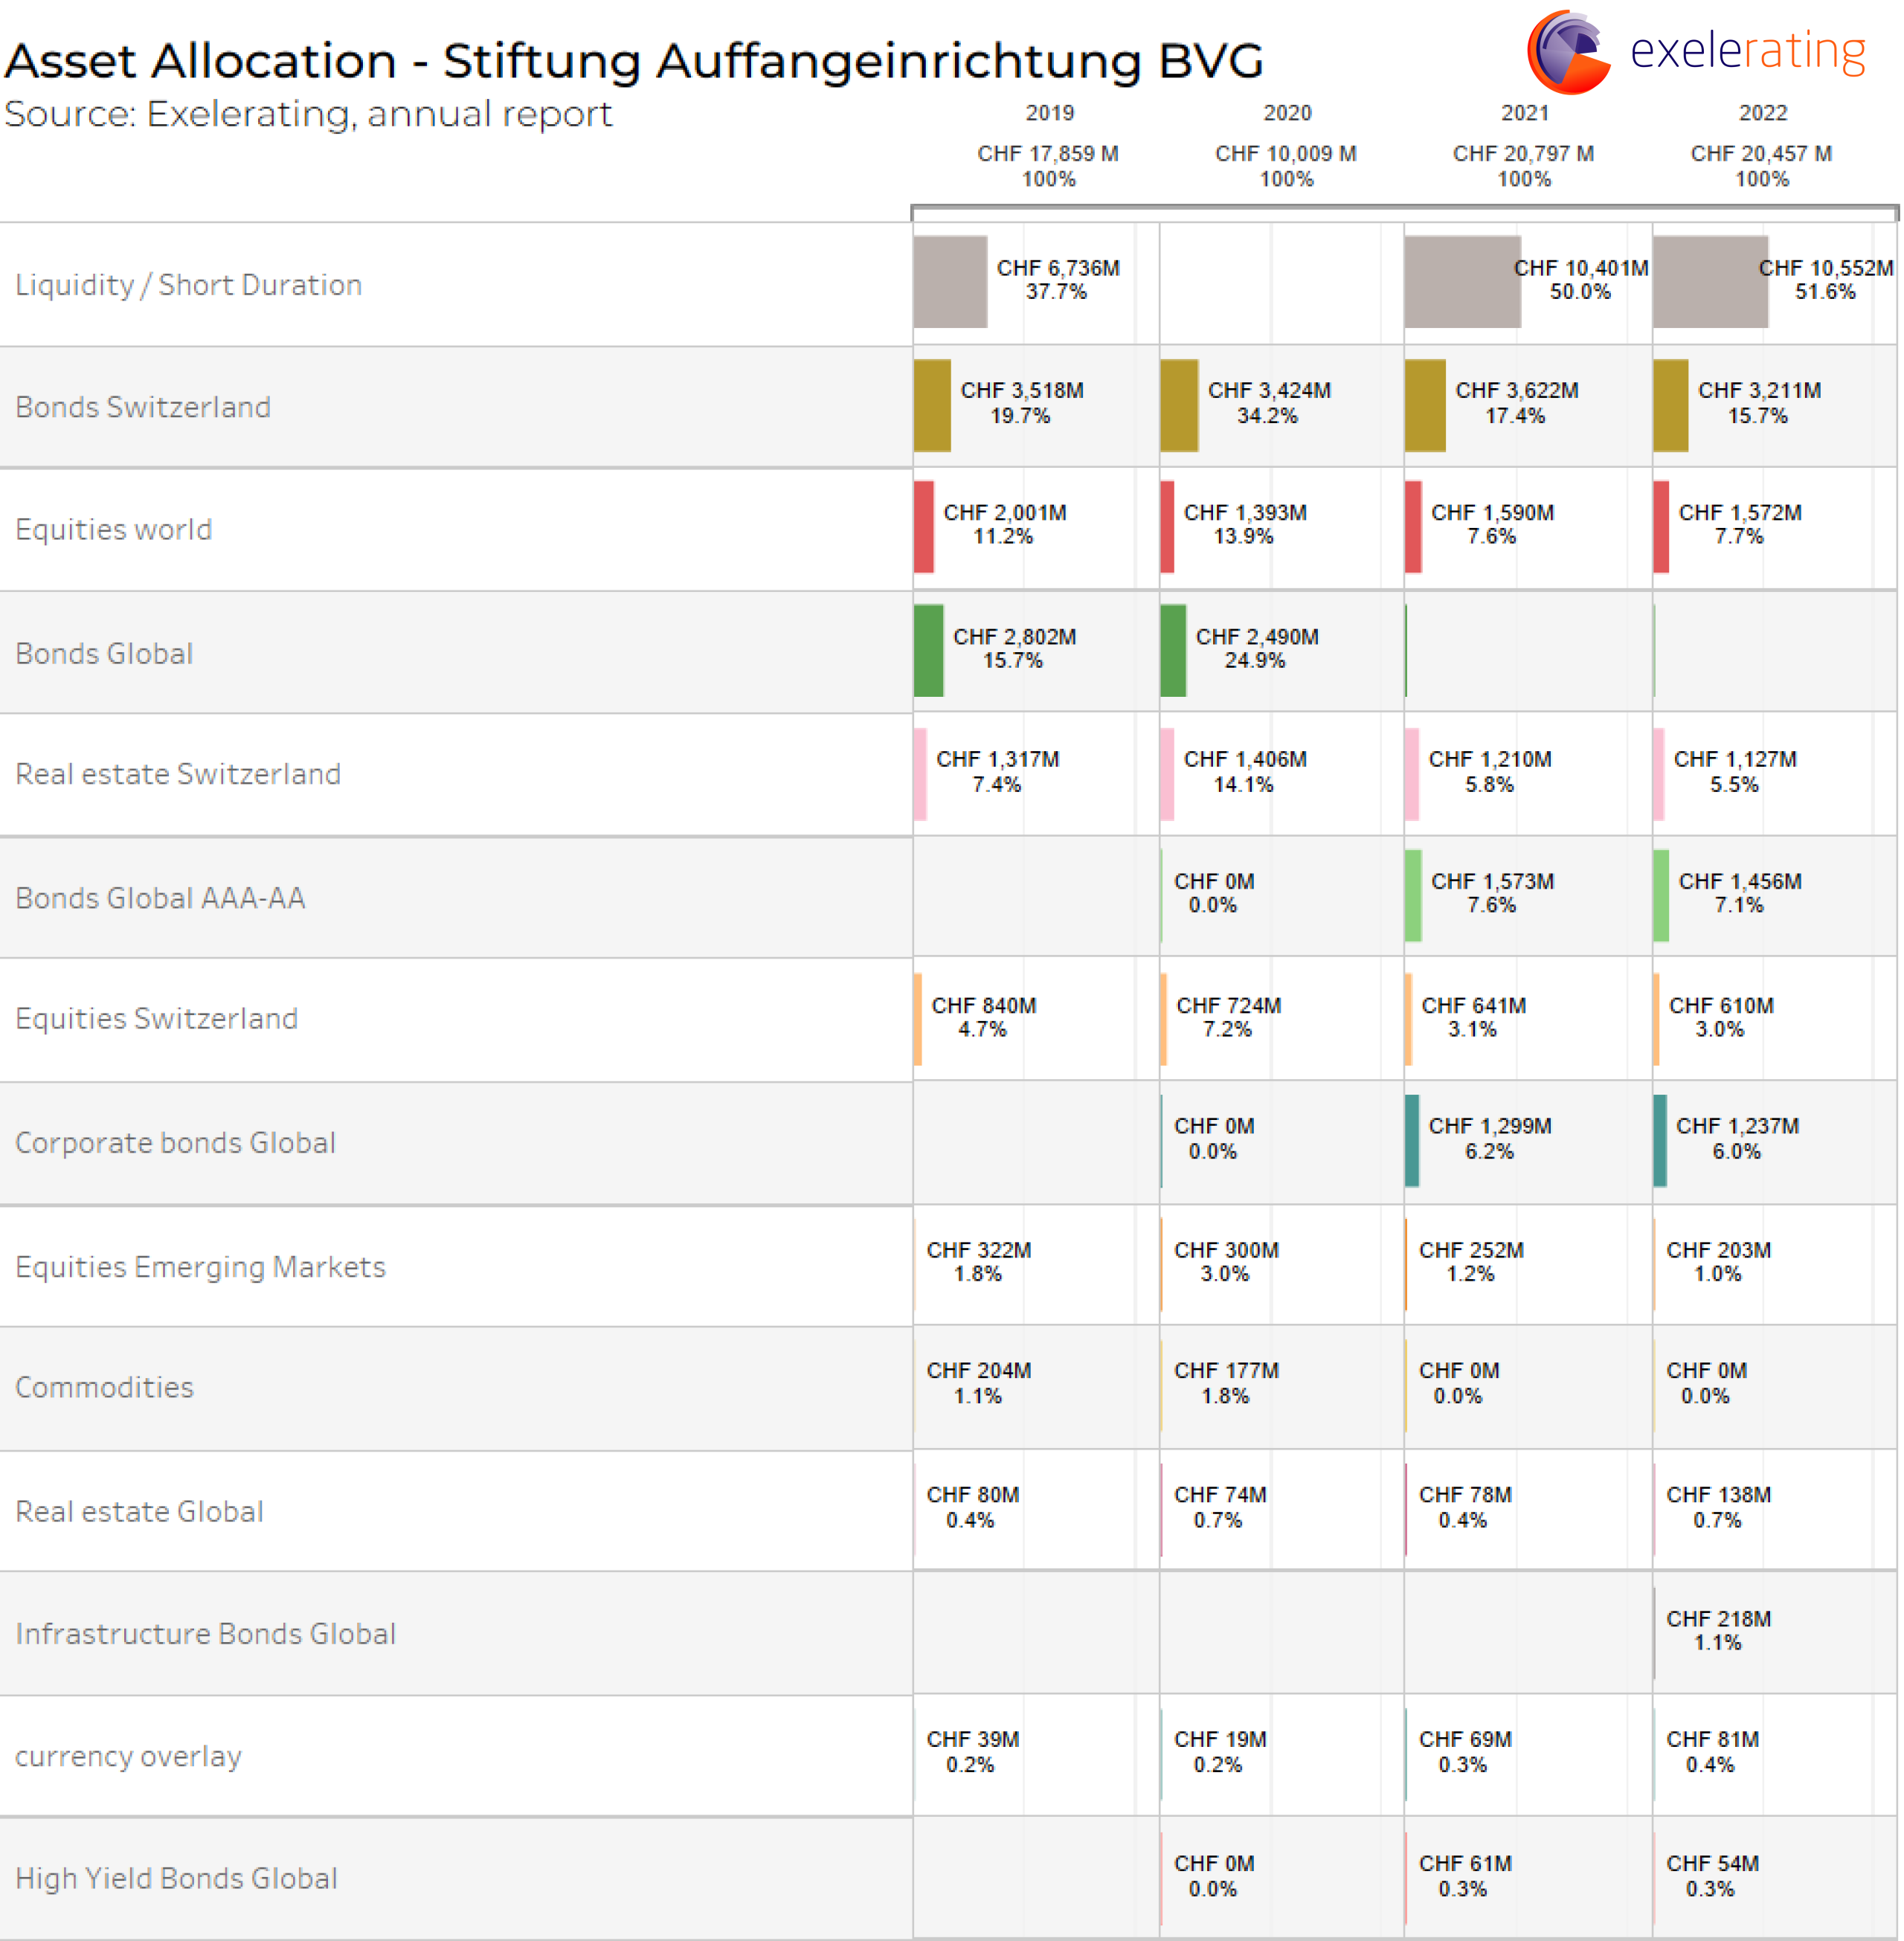 Breakdown of the asset allocation of the The Stiftung Auffangeinrichtung BVG in a horizontal bar chart.